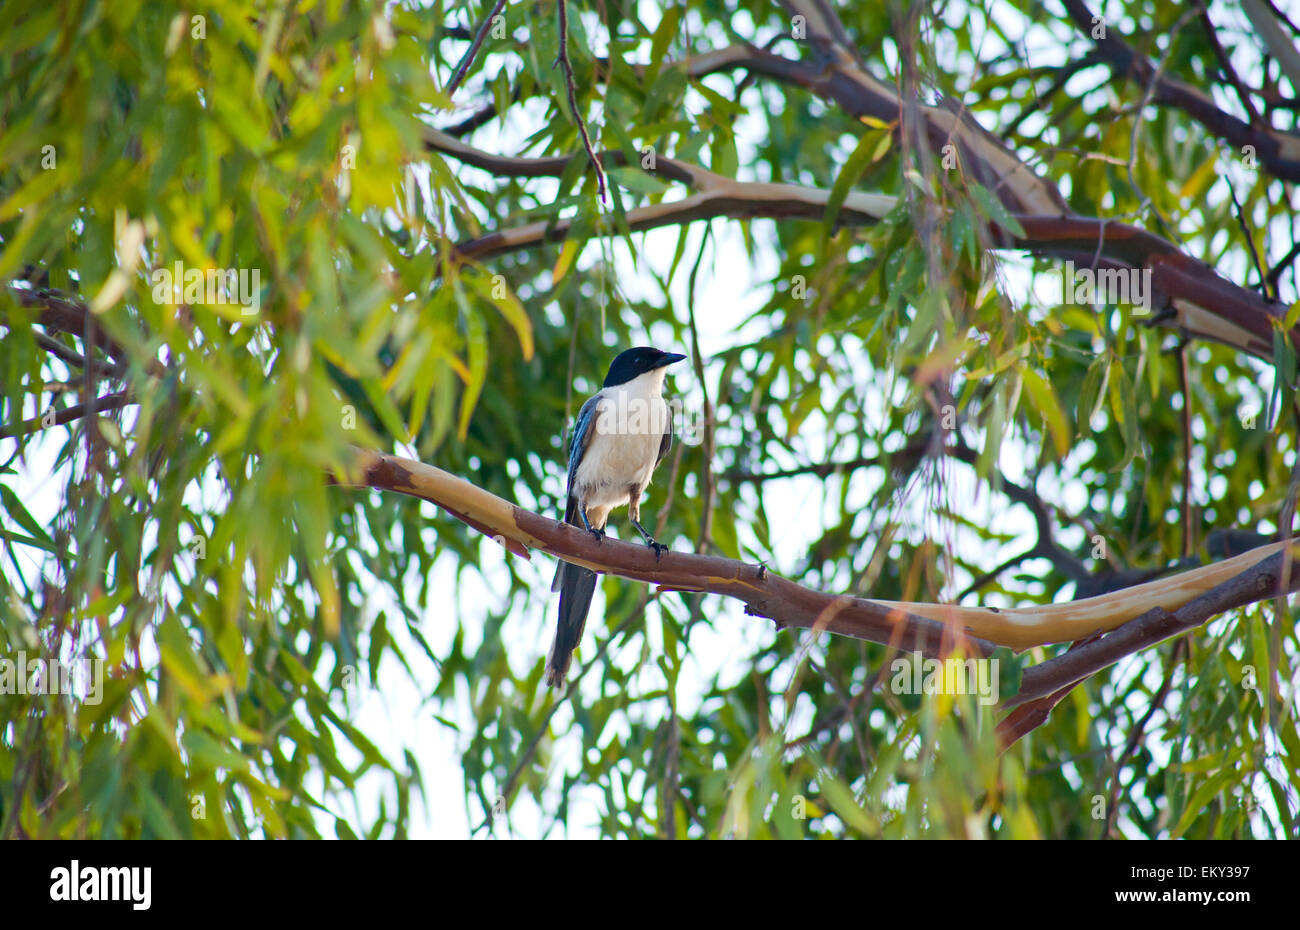 Azure-winged Magpie or Cyanopica cyanus perched on Eucalyptus tree branch Stock Photo